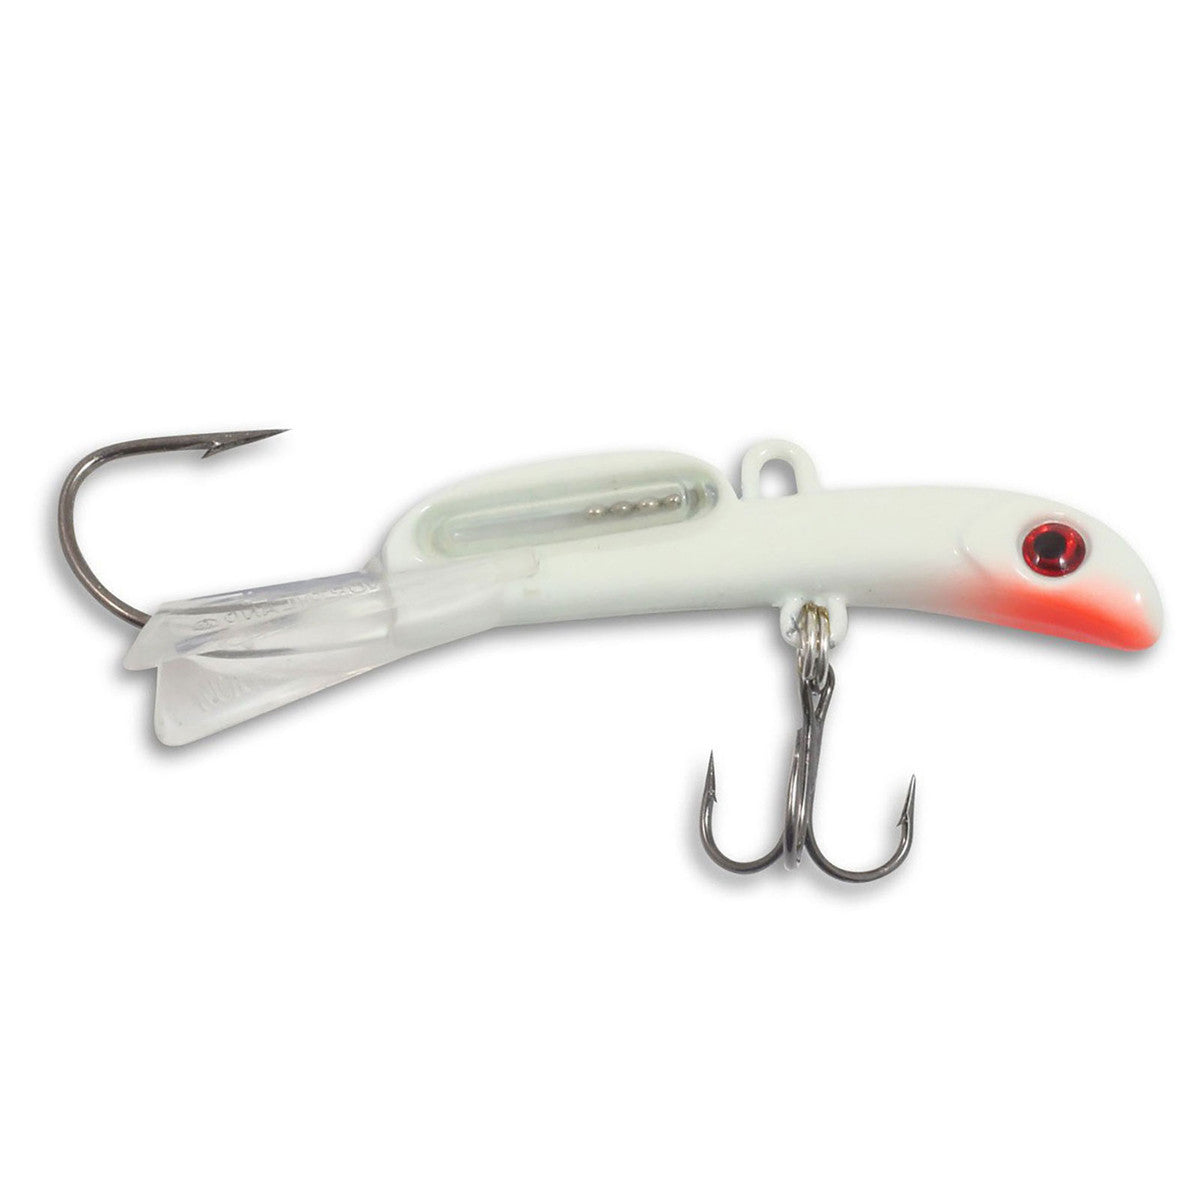 The Producers Finnigan's Minnow Fishing Lure Jointed No. 4 Floating